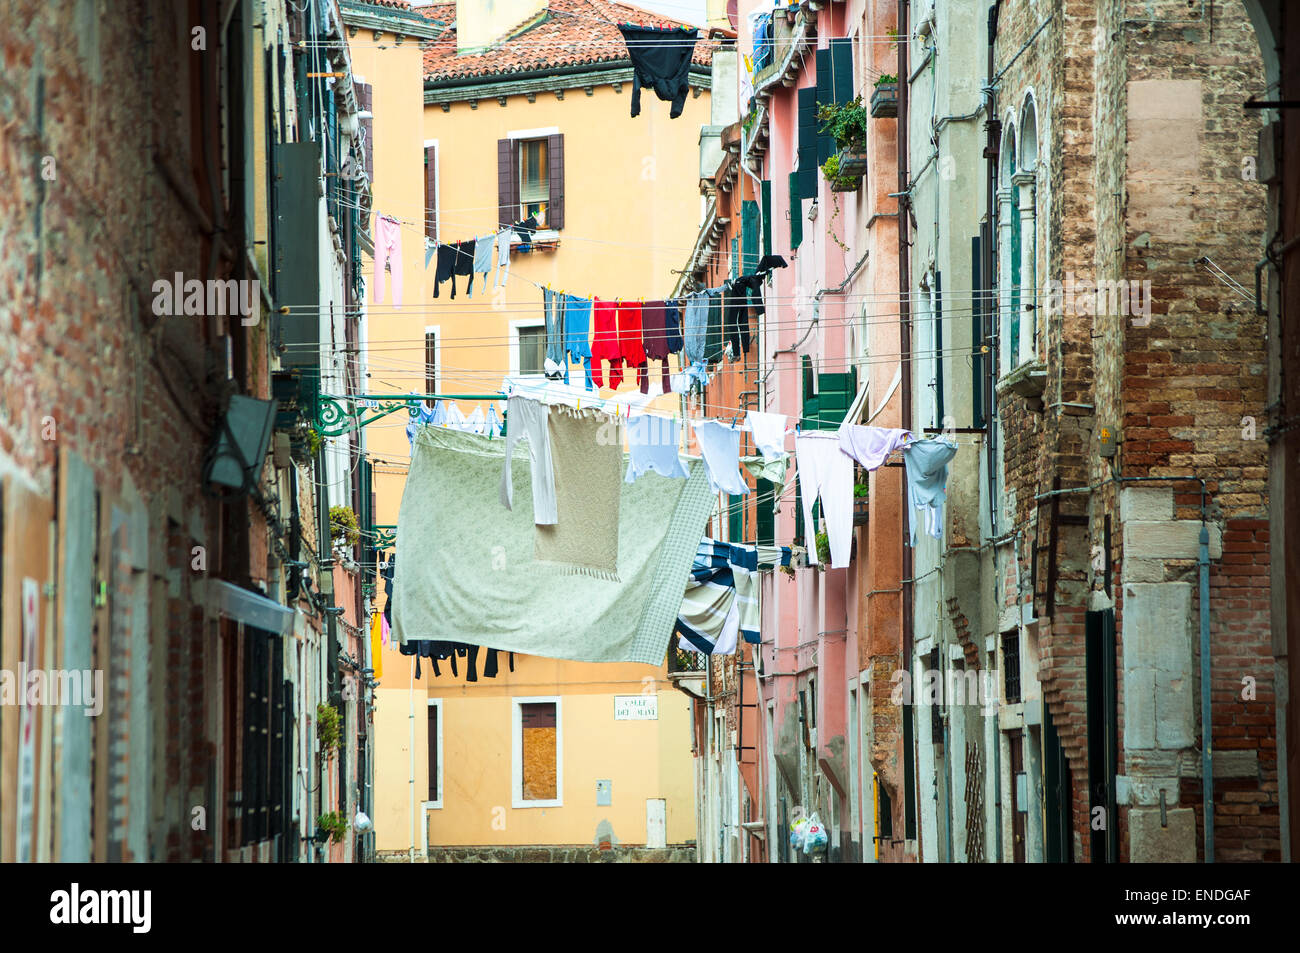 Typical street in Venice, Italy with clothes hanging out to dry in-between houses Stock Photo